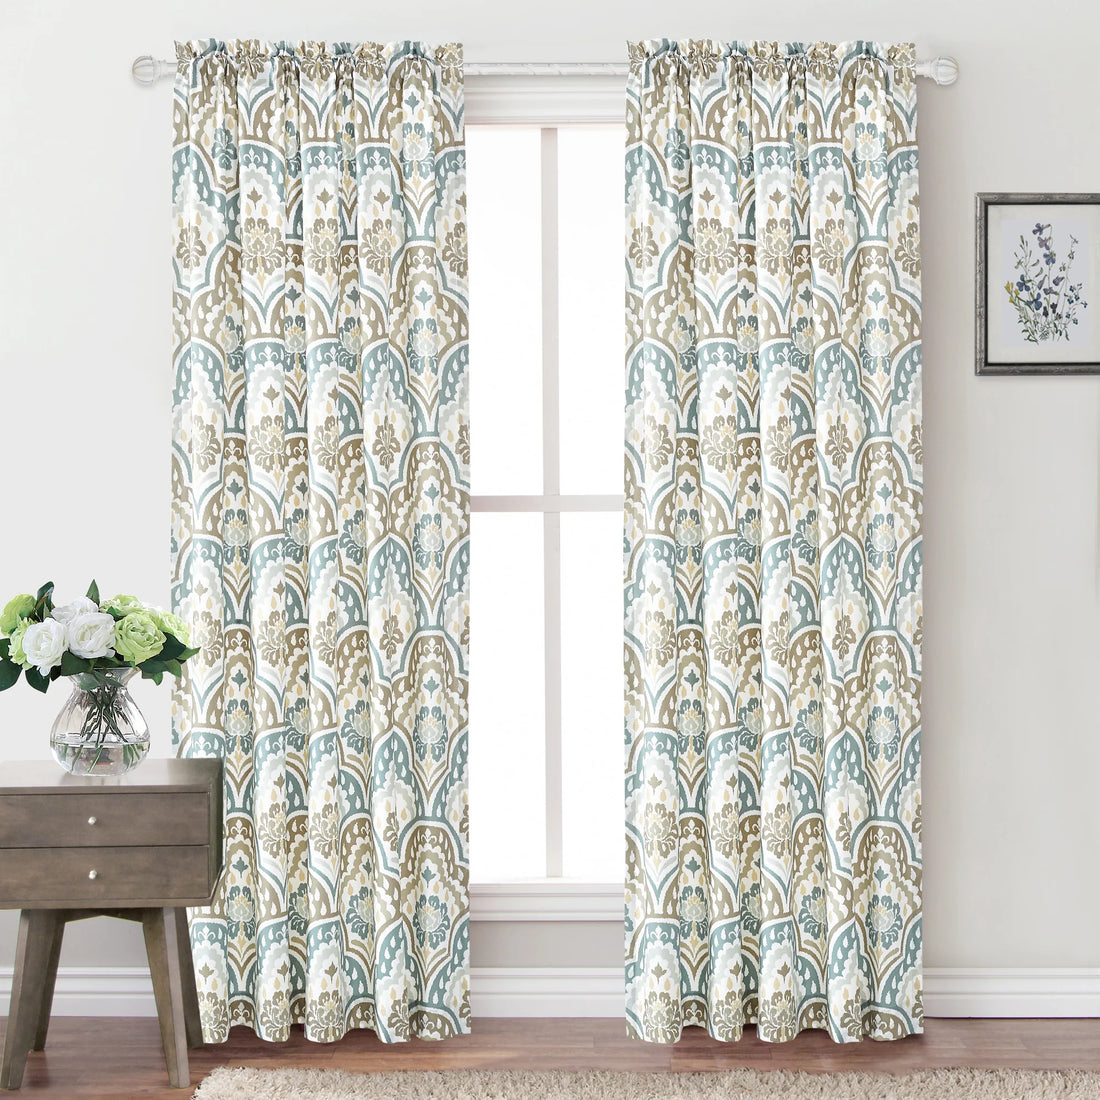 8 Tips To Style and Arrange Your New Curtains | Home Soft Things